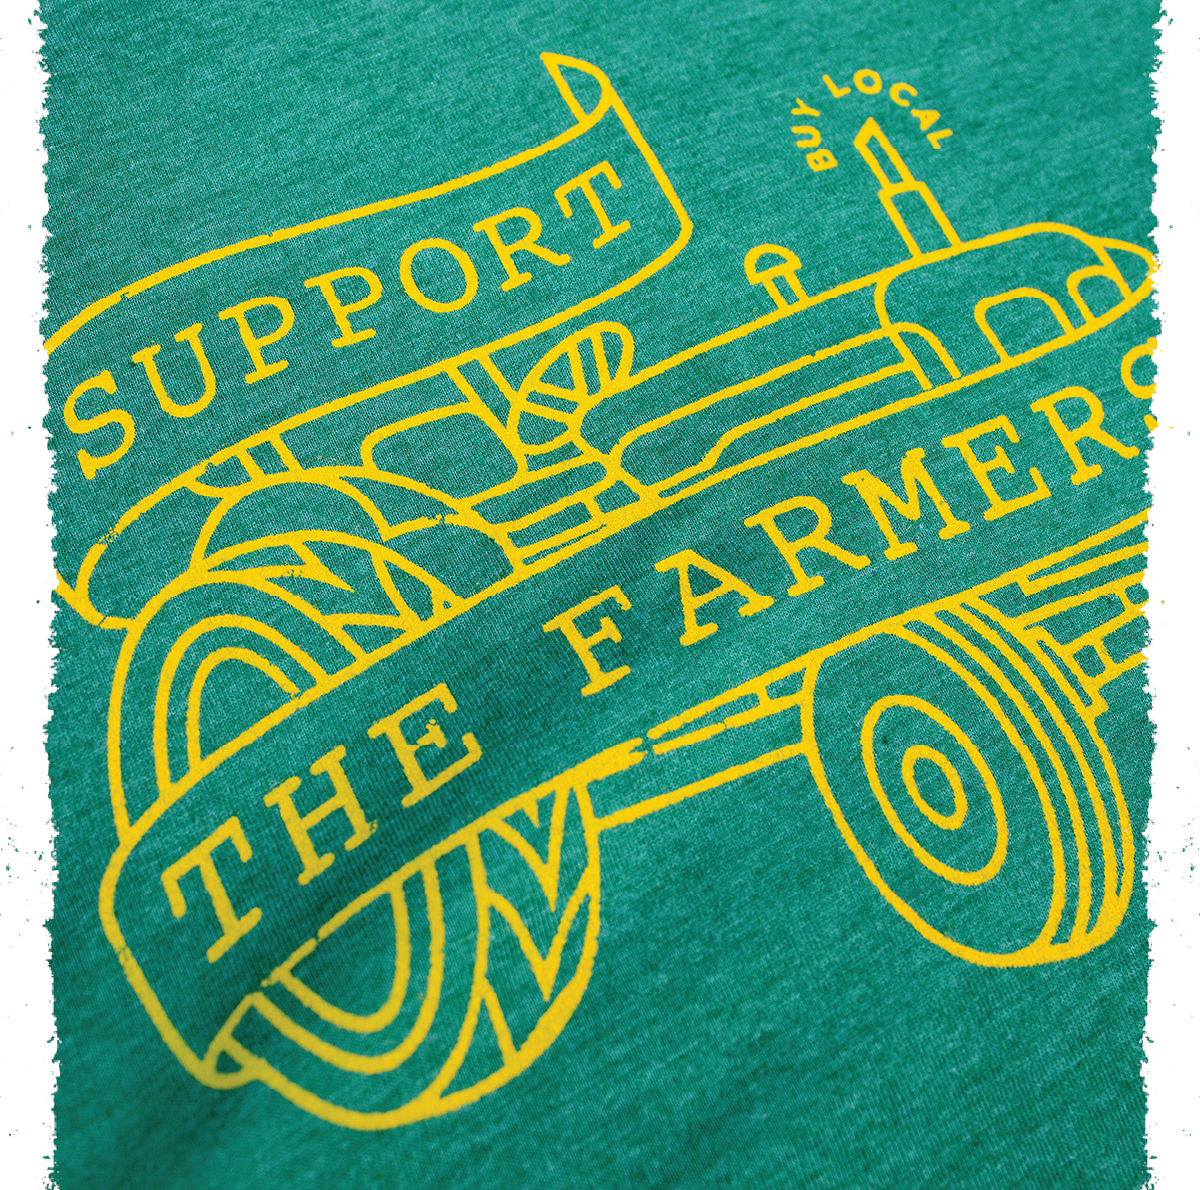 Support The Farmers